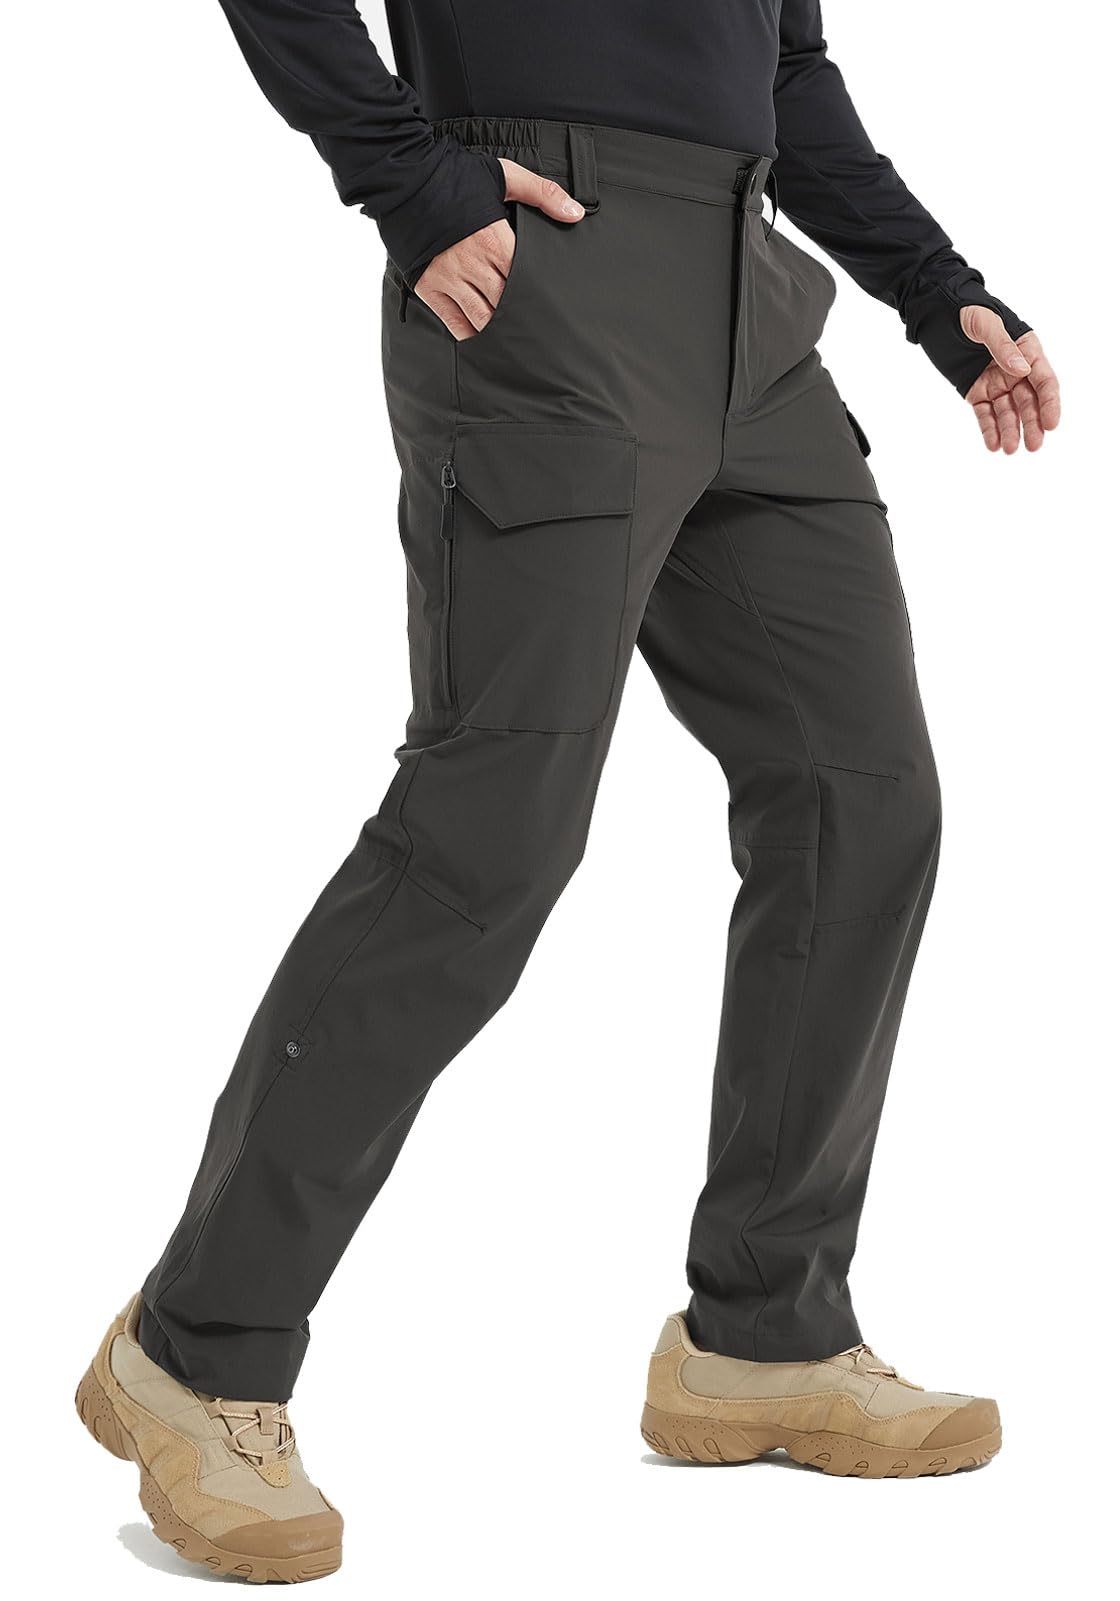  Mens-Hiking-Pants Cargo Waterproof Lightweight Quick Dry  Stretch 7 Pockets For Travel Fishing Work Tactical Black 34